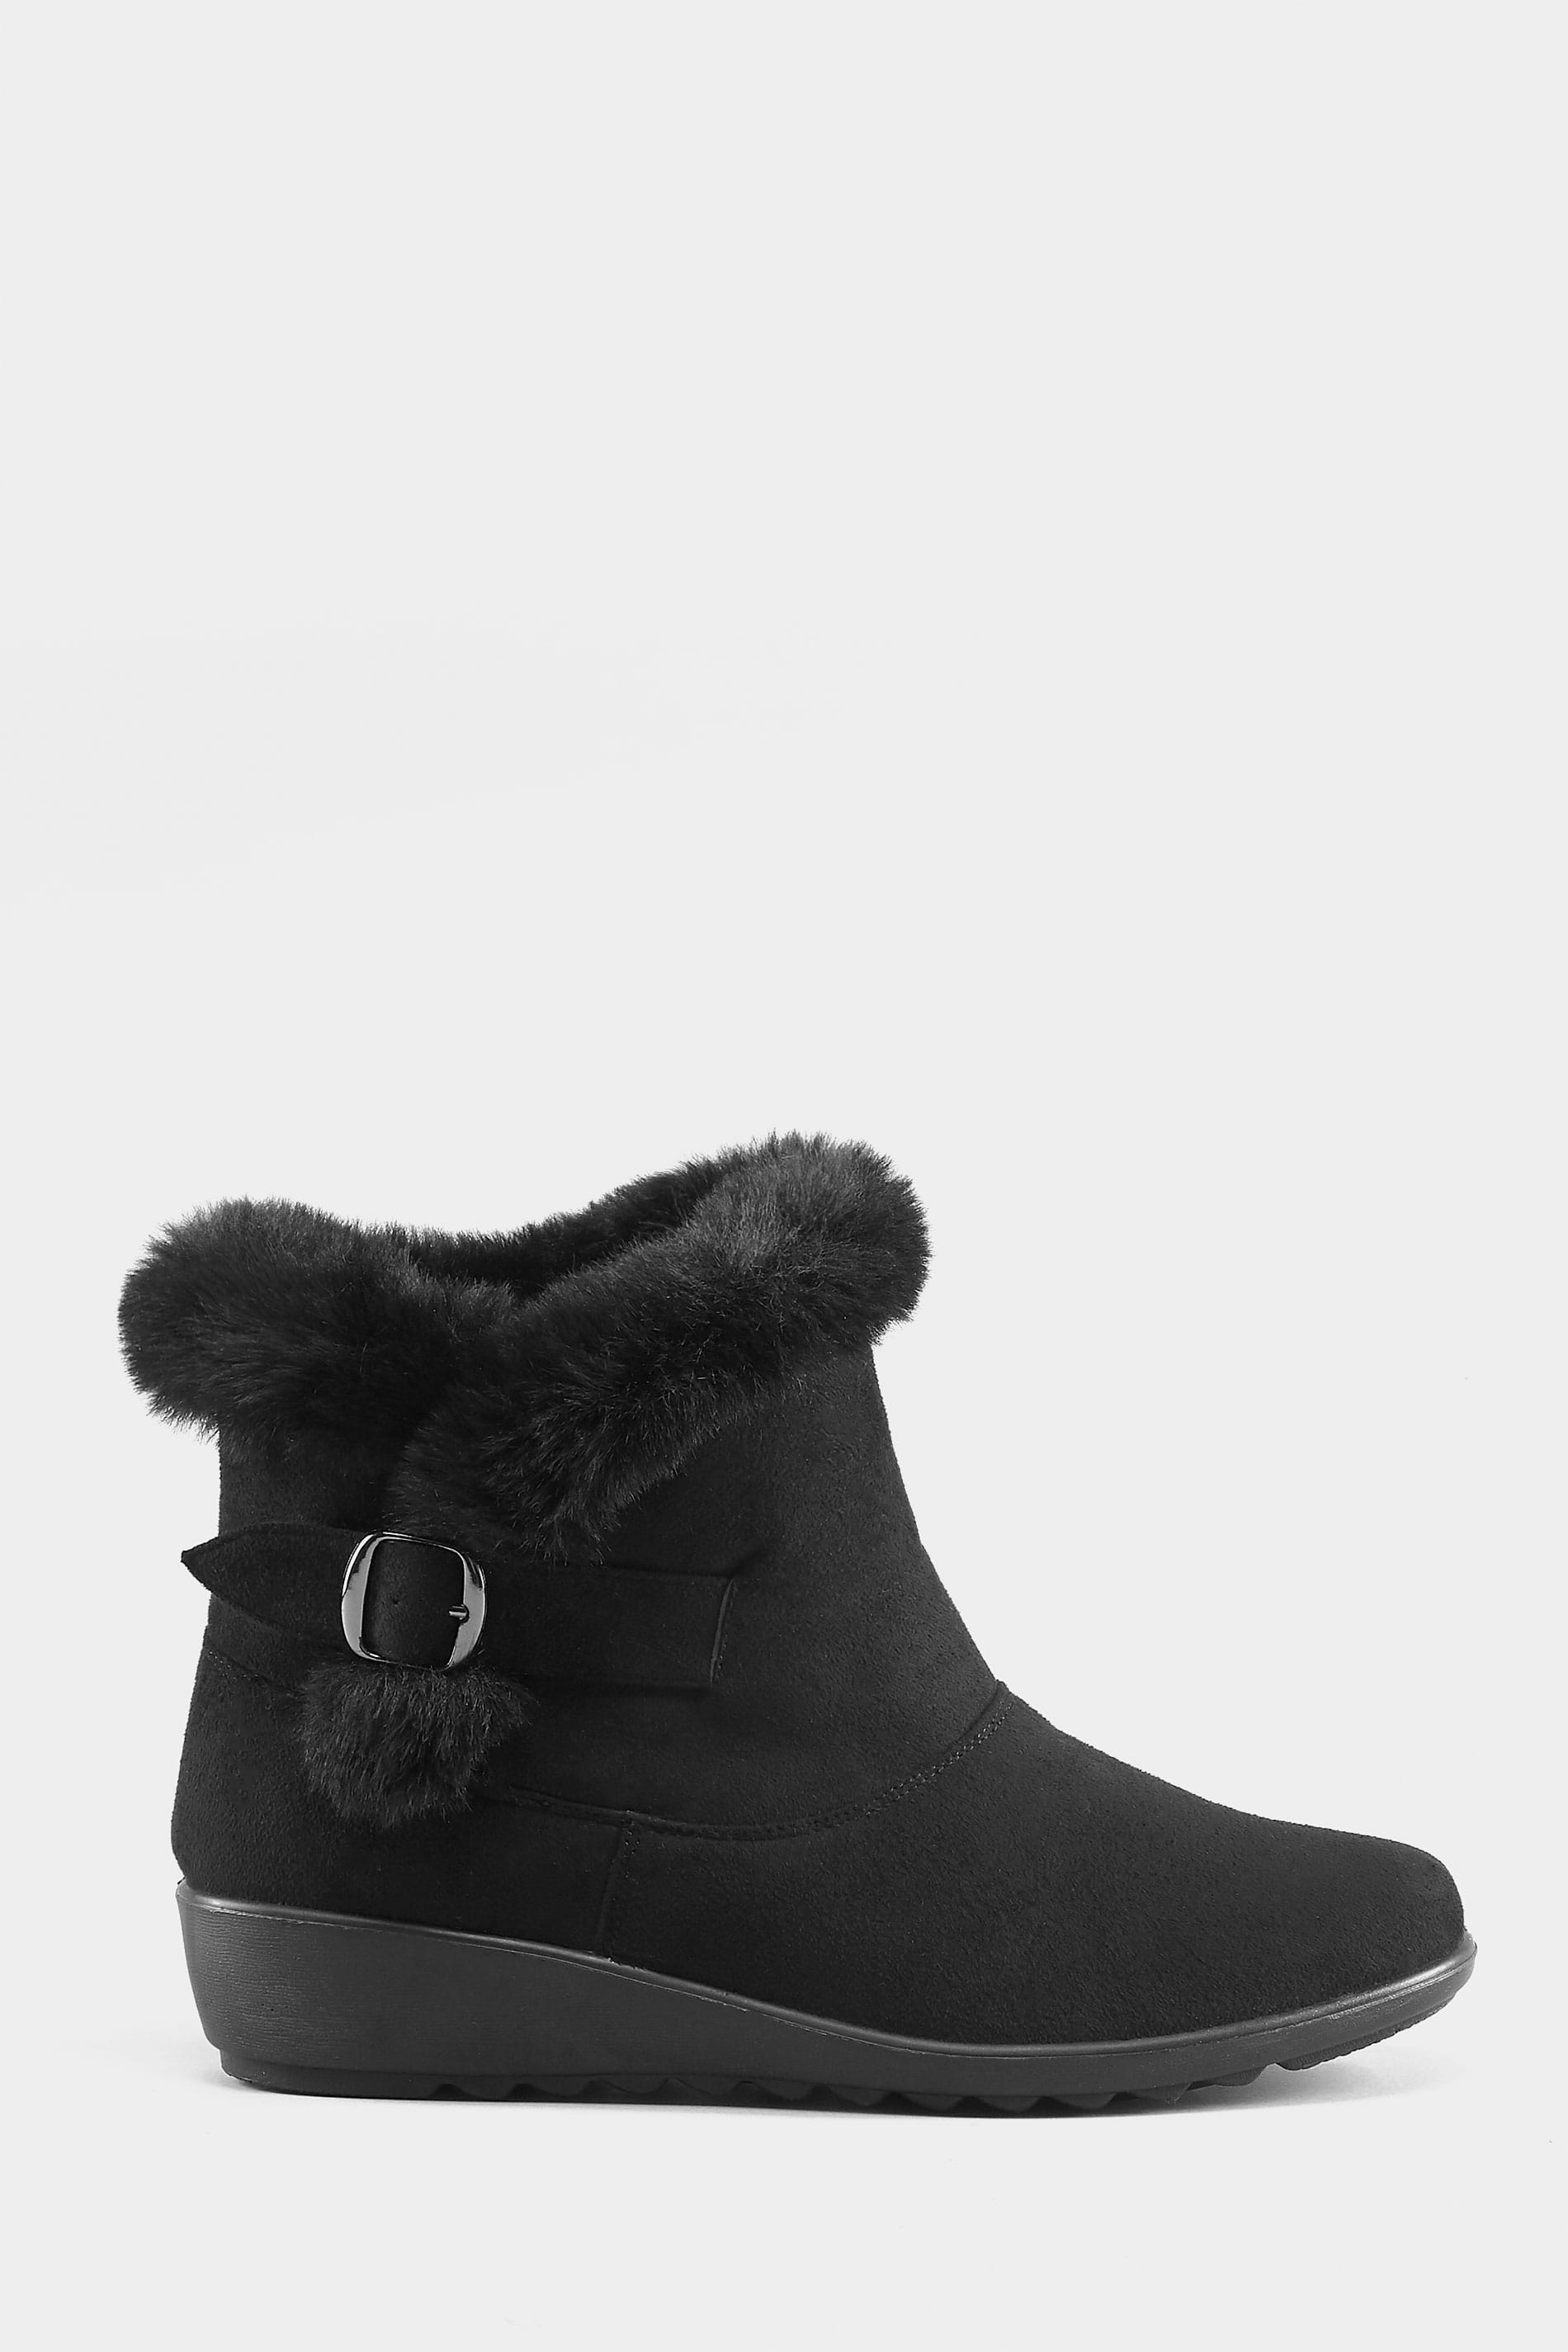 Black Faux Fur Trim Ankle Boot In EEE Fit, Wide Fitting Sizes 4EEE to ...